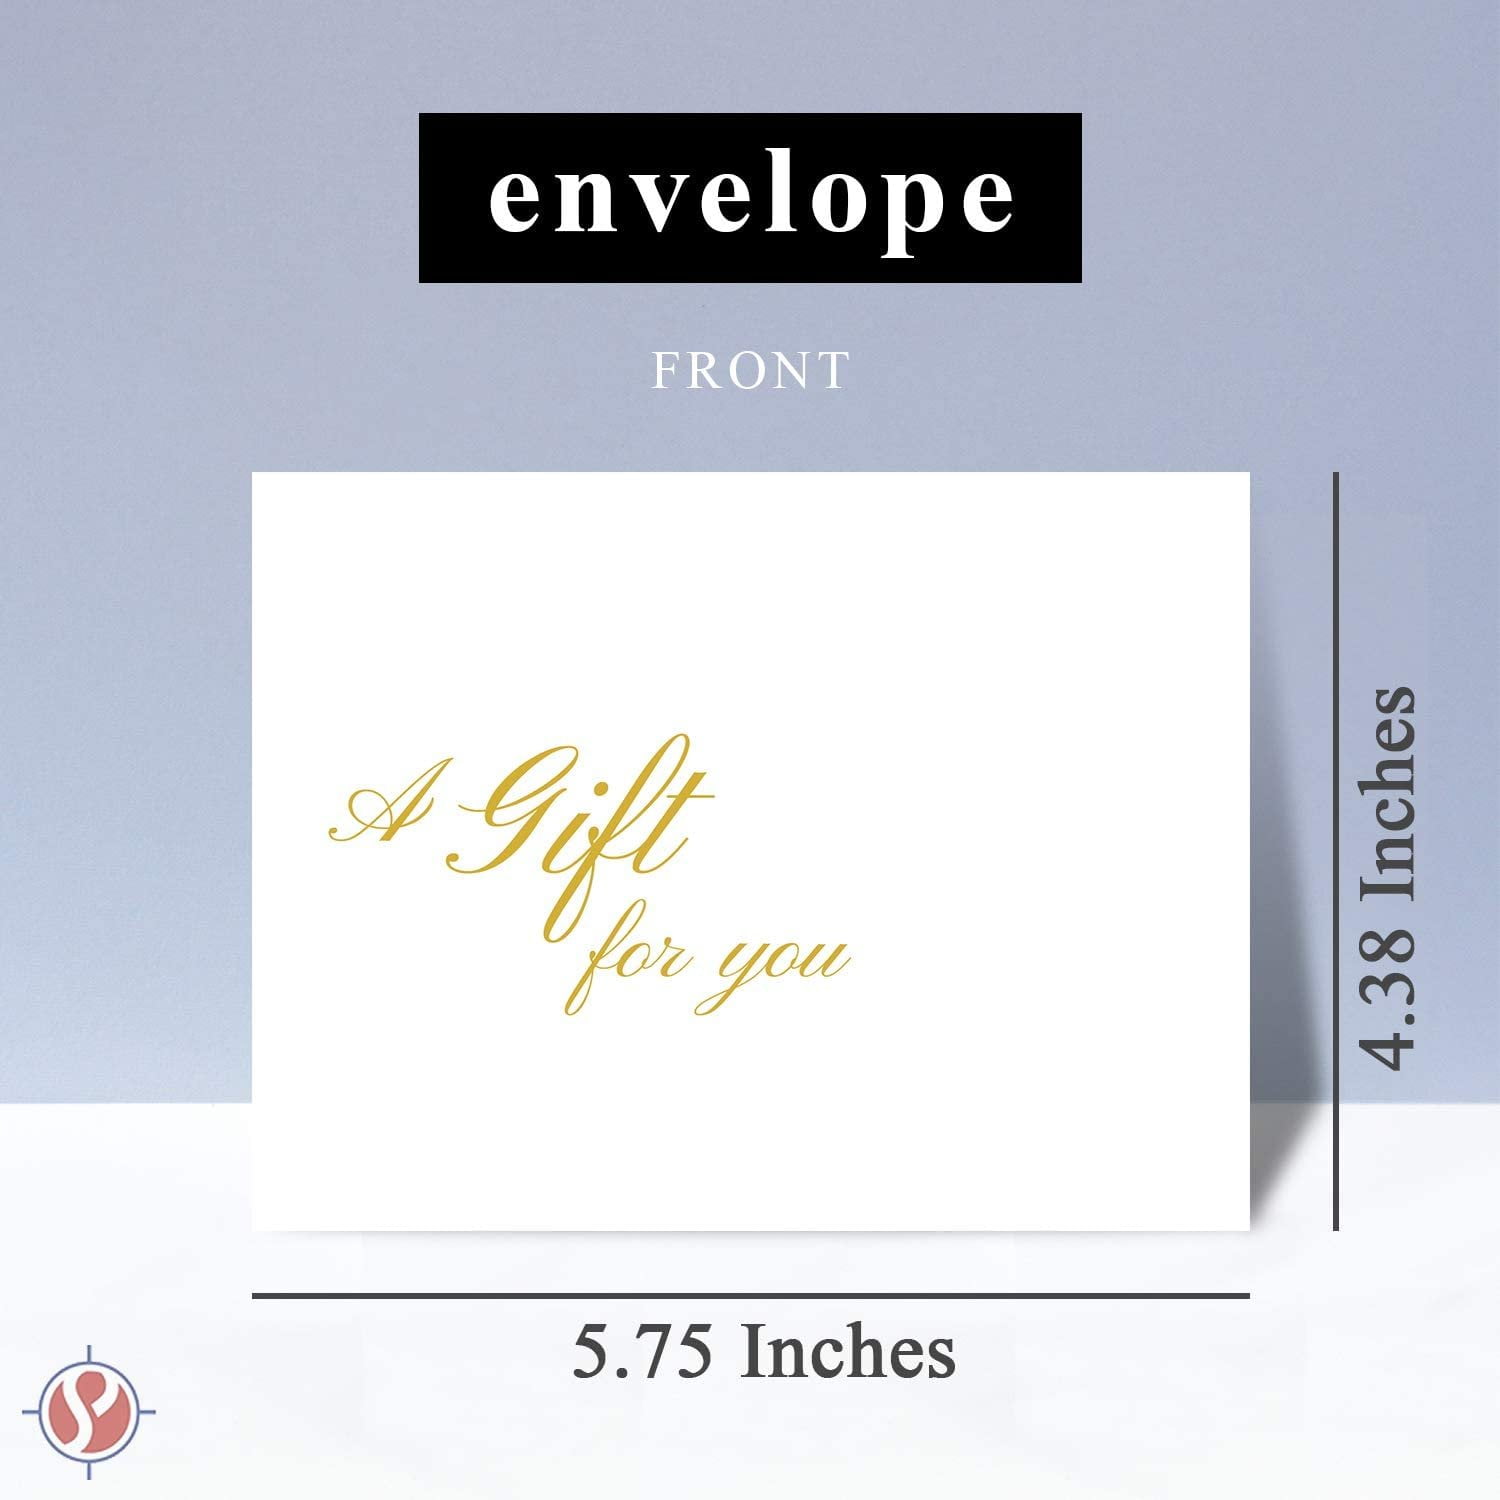  Blank Gift Certificates for Business - 25 Gold Foil Gift Certificate  Cards with Envelopes for Spa, Salon, Restaurants, Custom Client Vouchers  for Birthday, Work Gift Card - 3.75x7.5 : Office Products